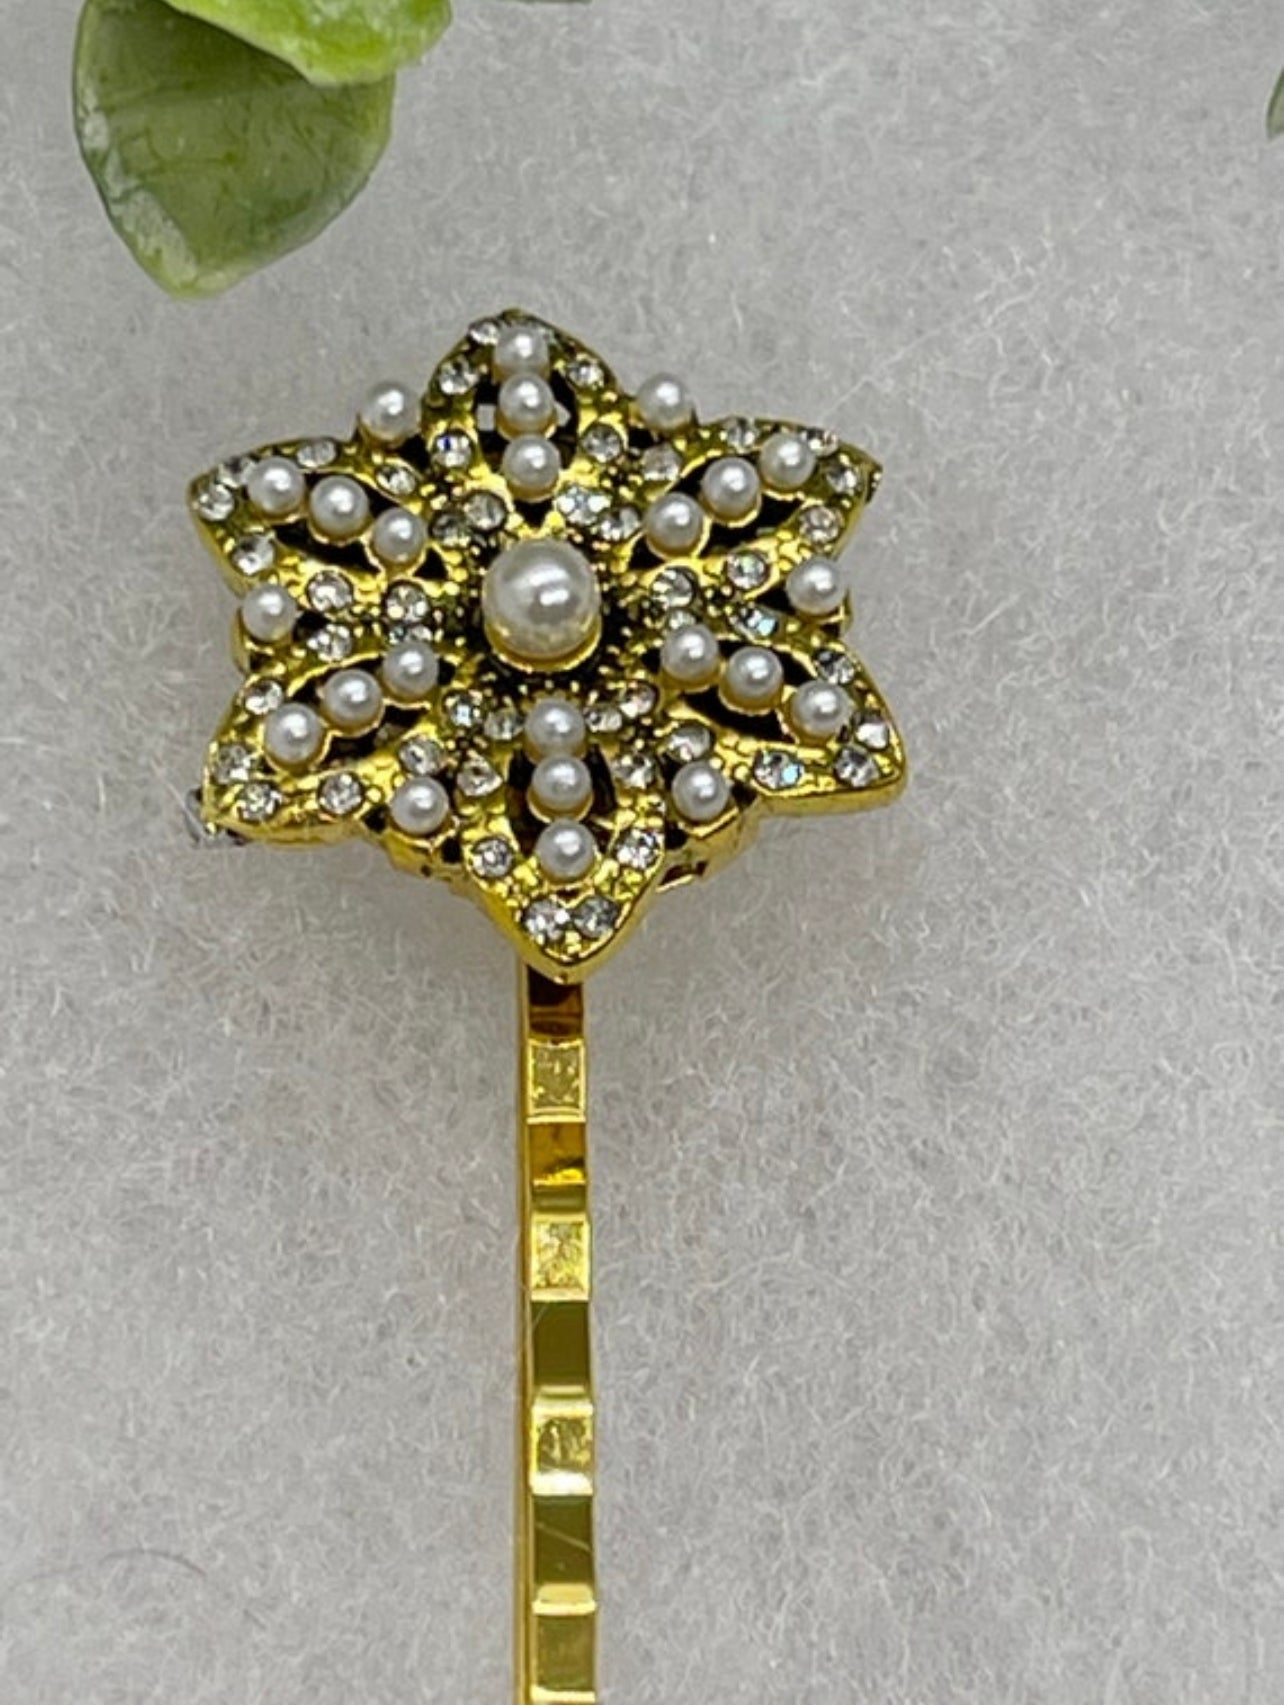 Gold Star Crystal Pearl flower vintage antique style hair pin approximately 2.5” long Handmade hair accessory bridal wedding Retro